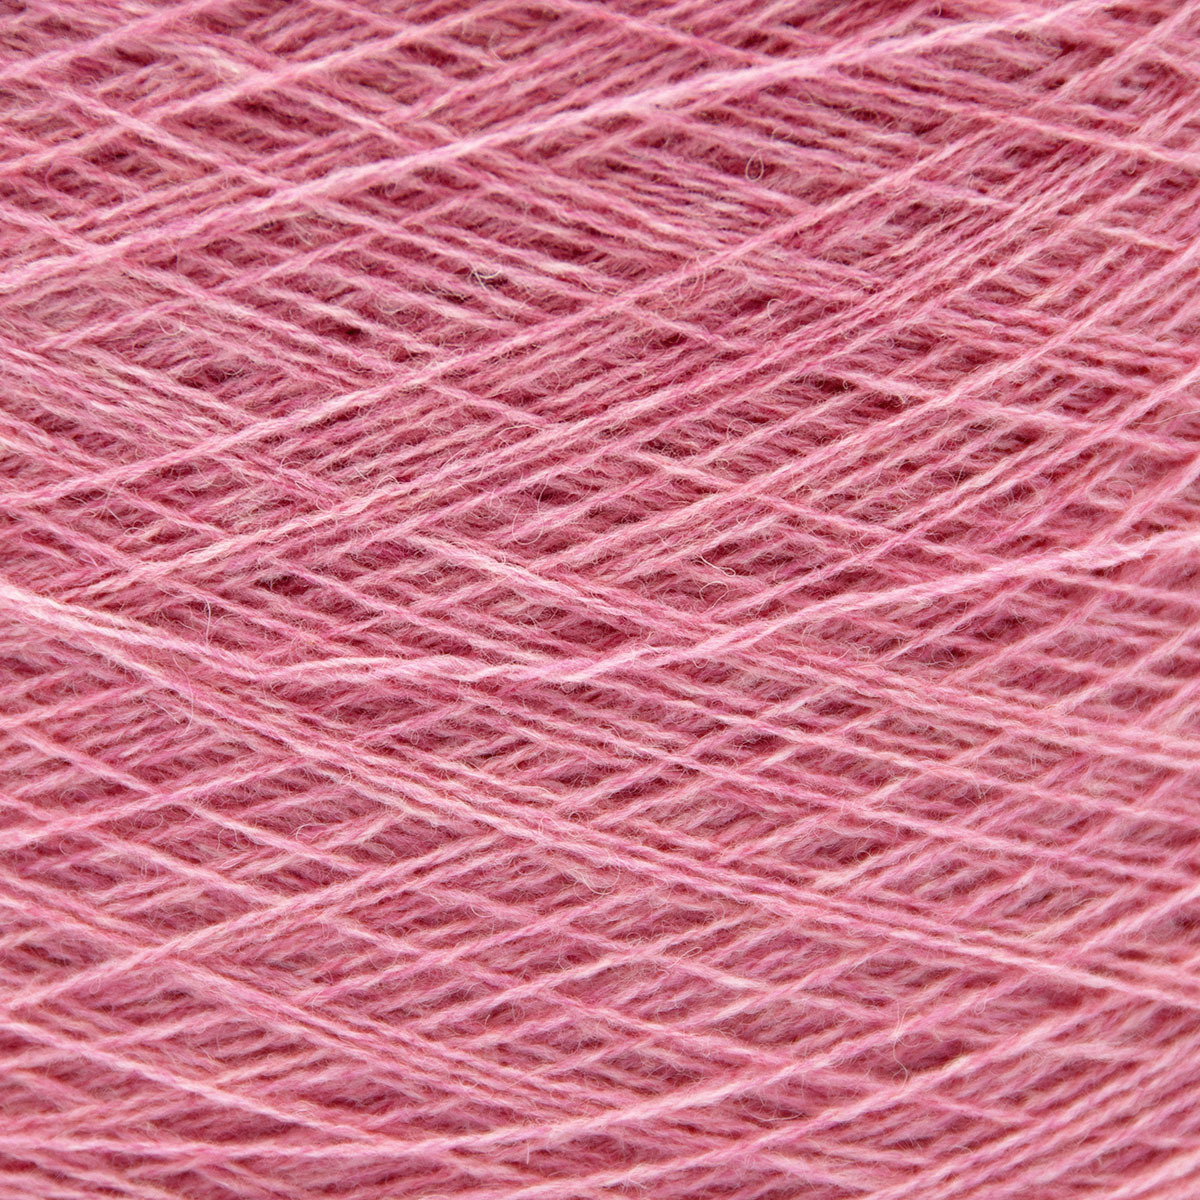 Knoll Yarns Supersoft - 287